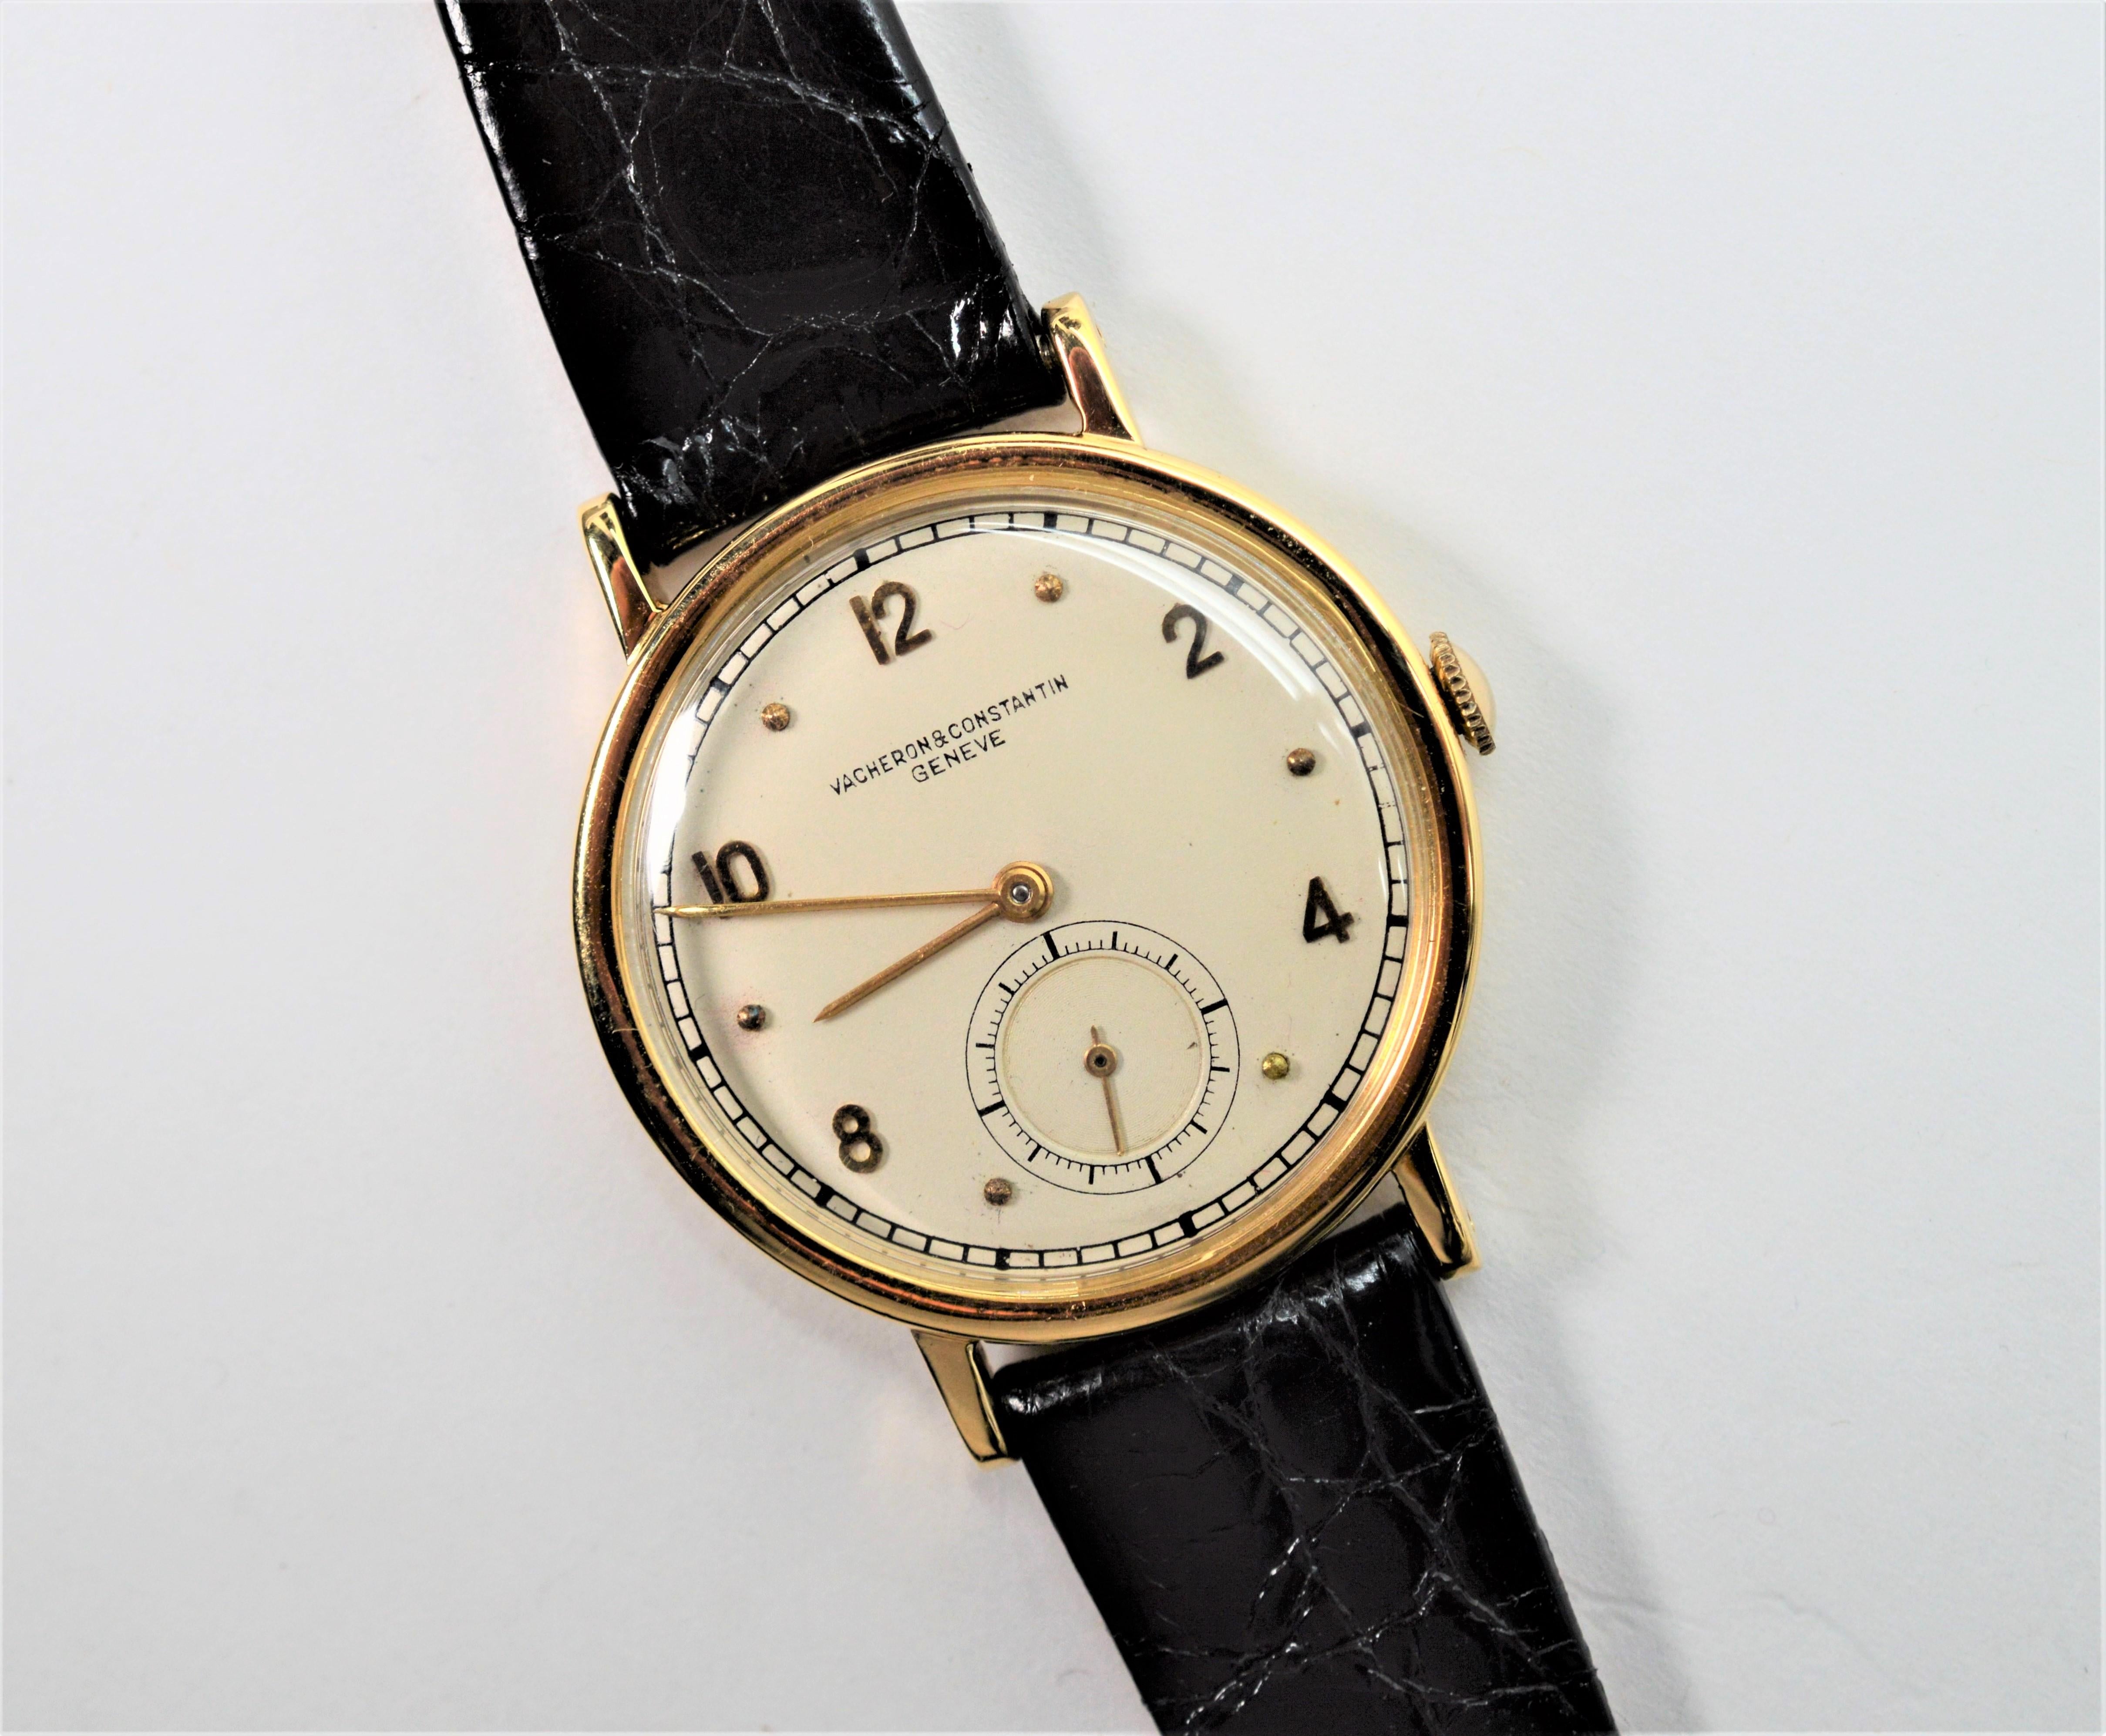 Fabulous late 1940's Men's Vacheron & Constantin Geneve eighteen karat 18K yellow gold wrist watch, number 453-3B. Classic slender styling, easy to read white face, gold Arabic numerals and gold dot markers. The watch case size is 33mm and is fitted